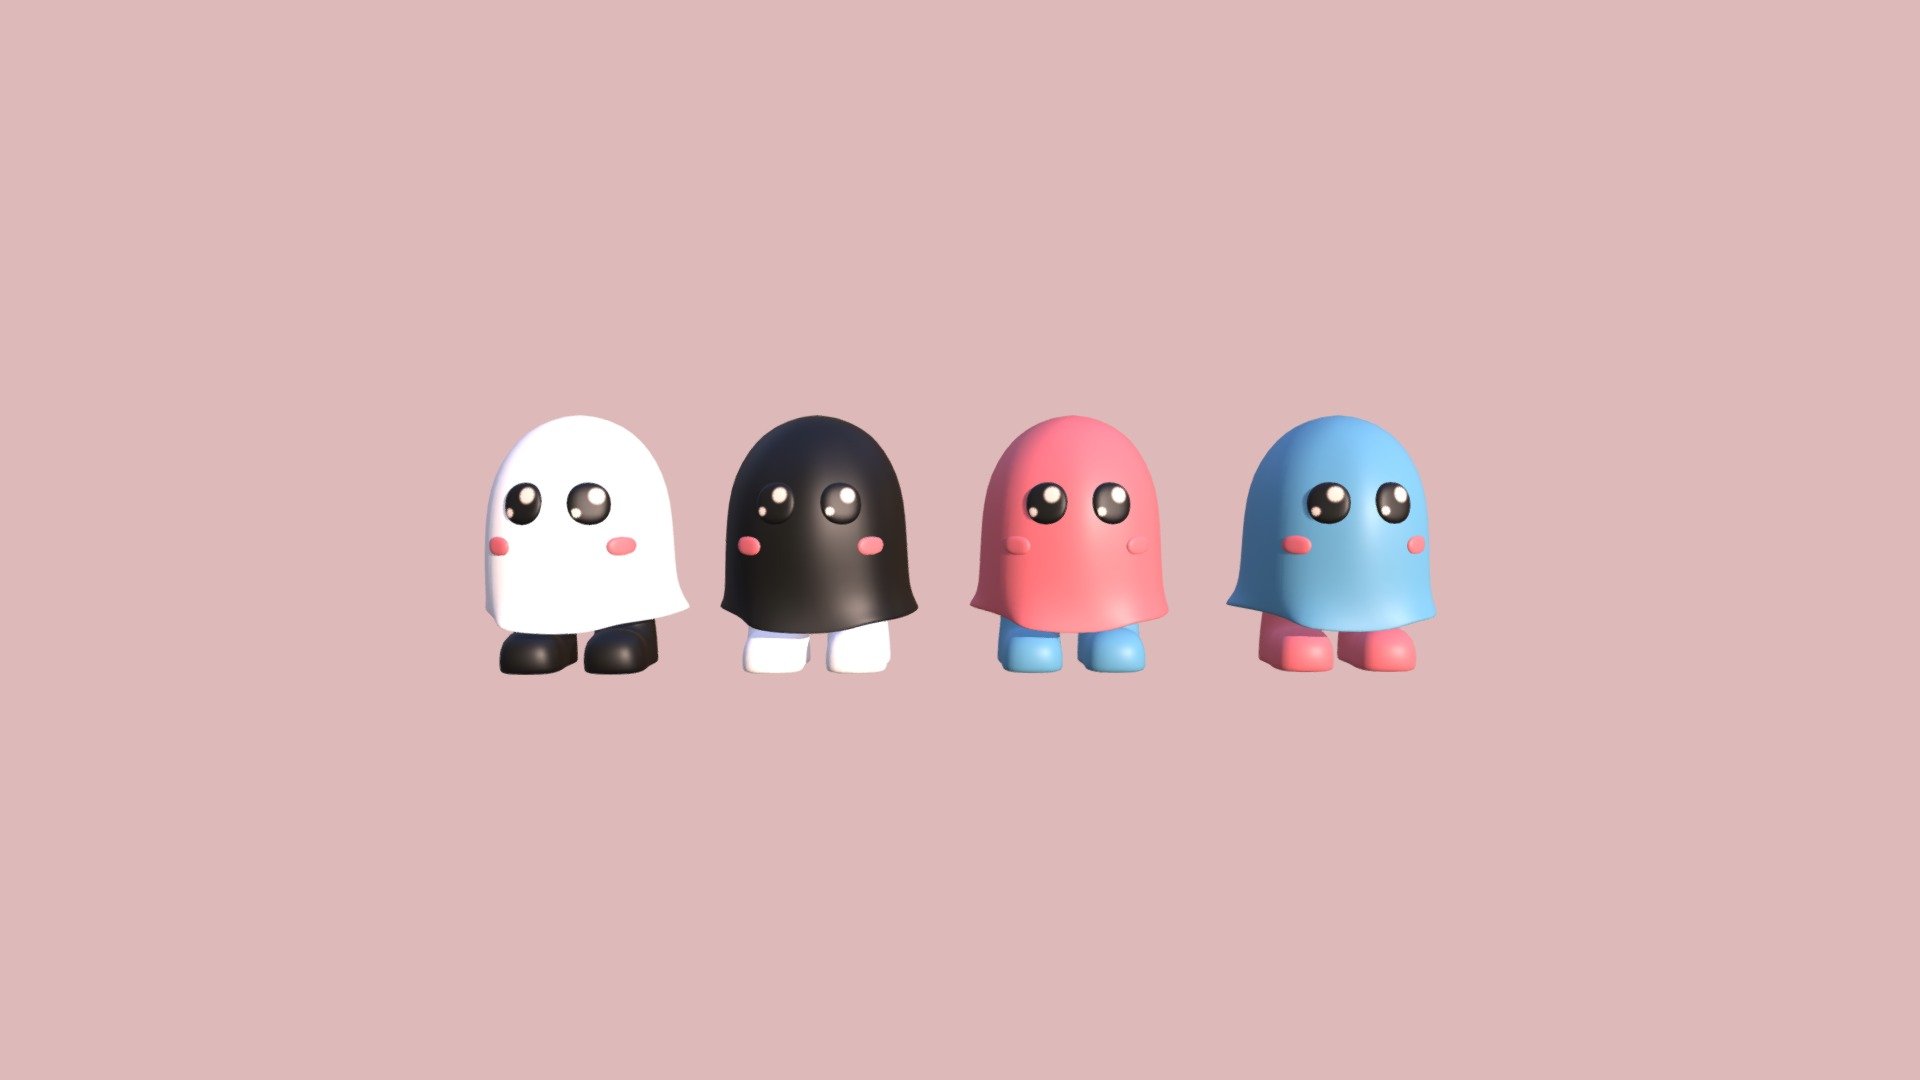 4 different ghosts just waiting to be in your render. Use one, some or use all, the choice is yours.

All ghosts are UV unwrapped and textured 3d model